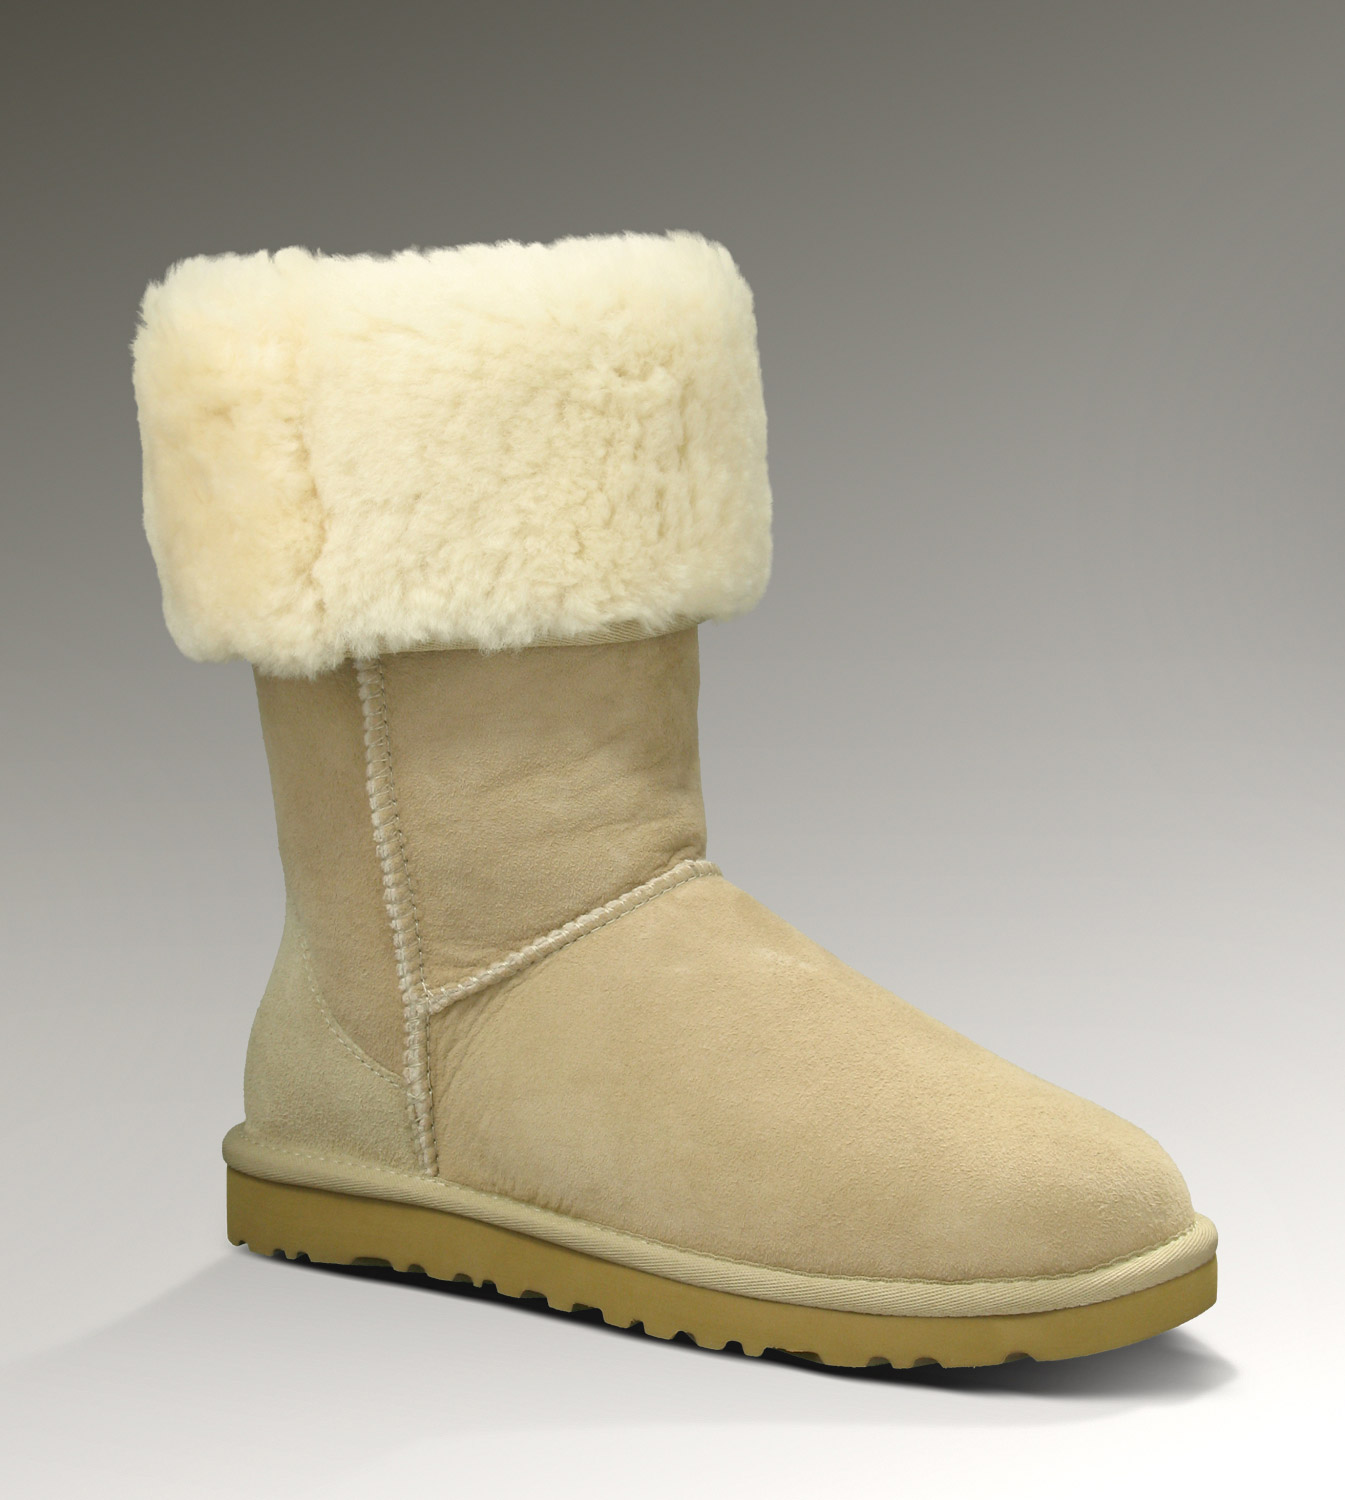 UGG Boots Classic Tall 5815 Sand